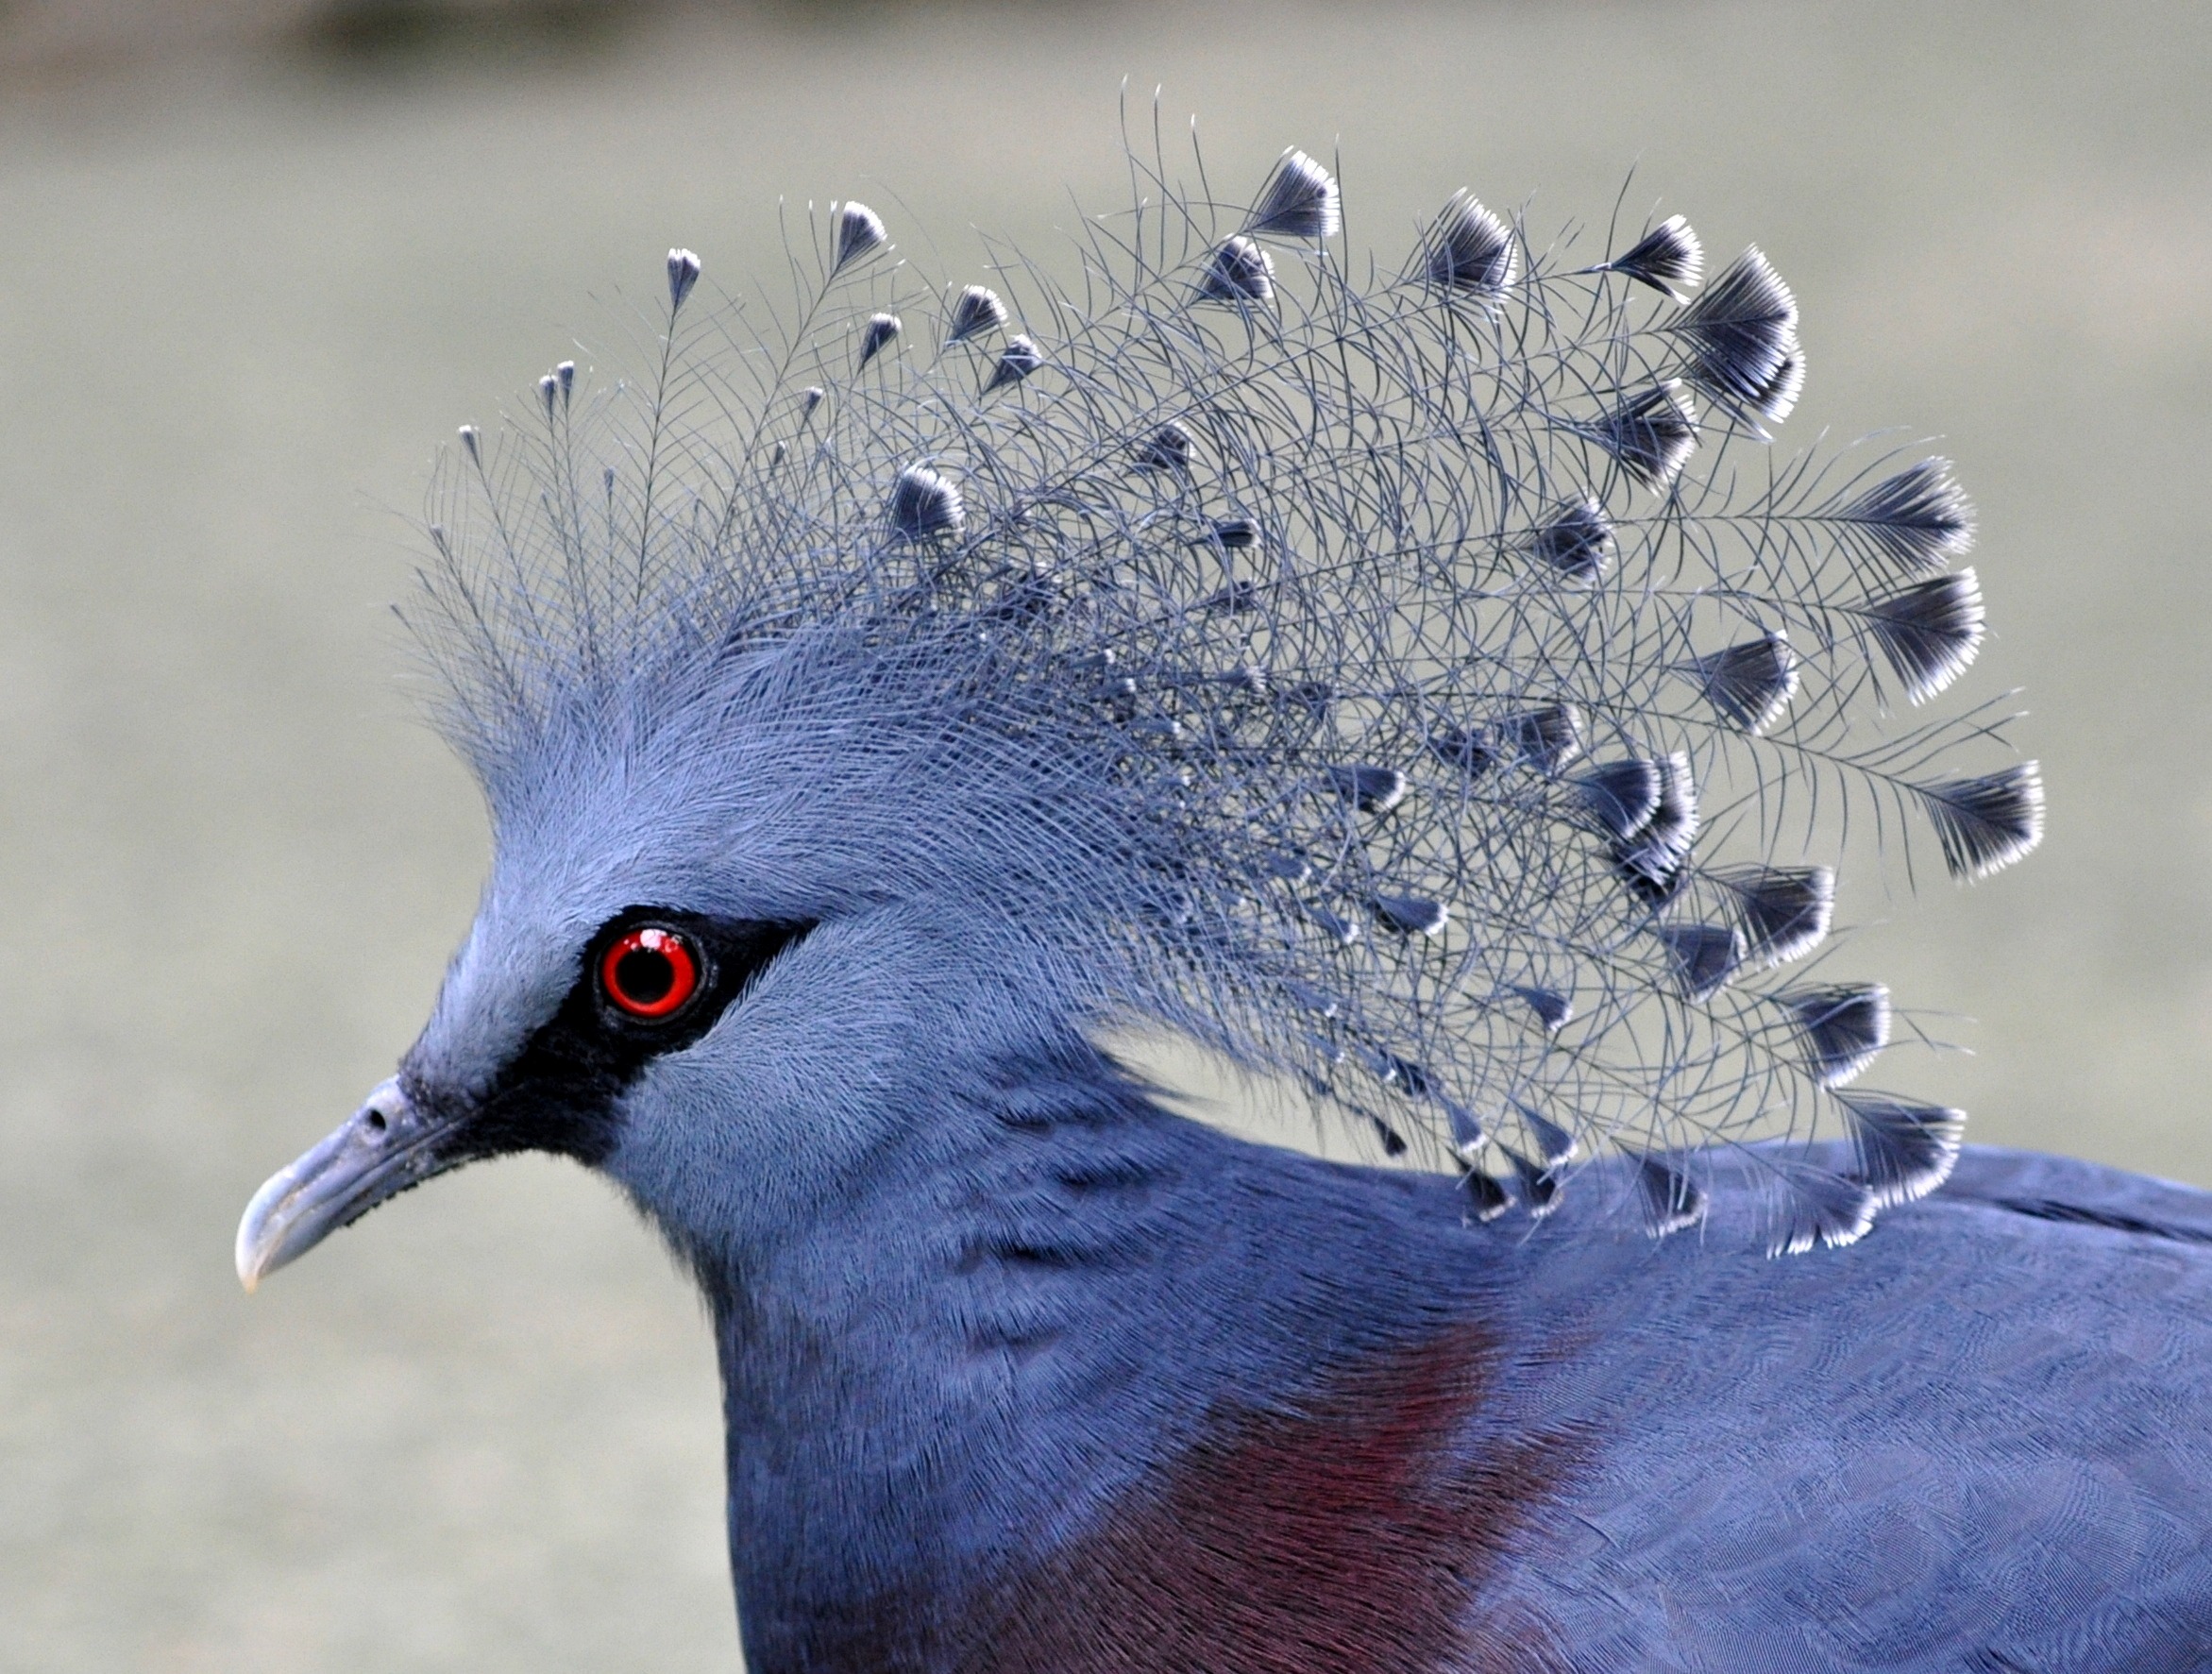 Victoria Crowned Pigeon-Most Beautiful Pigeon In The World